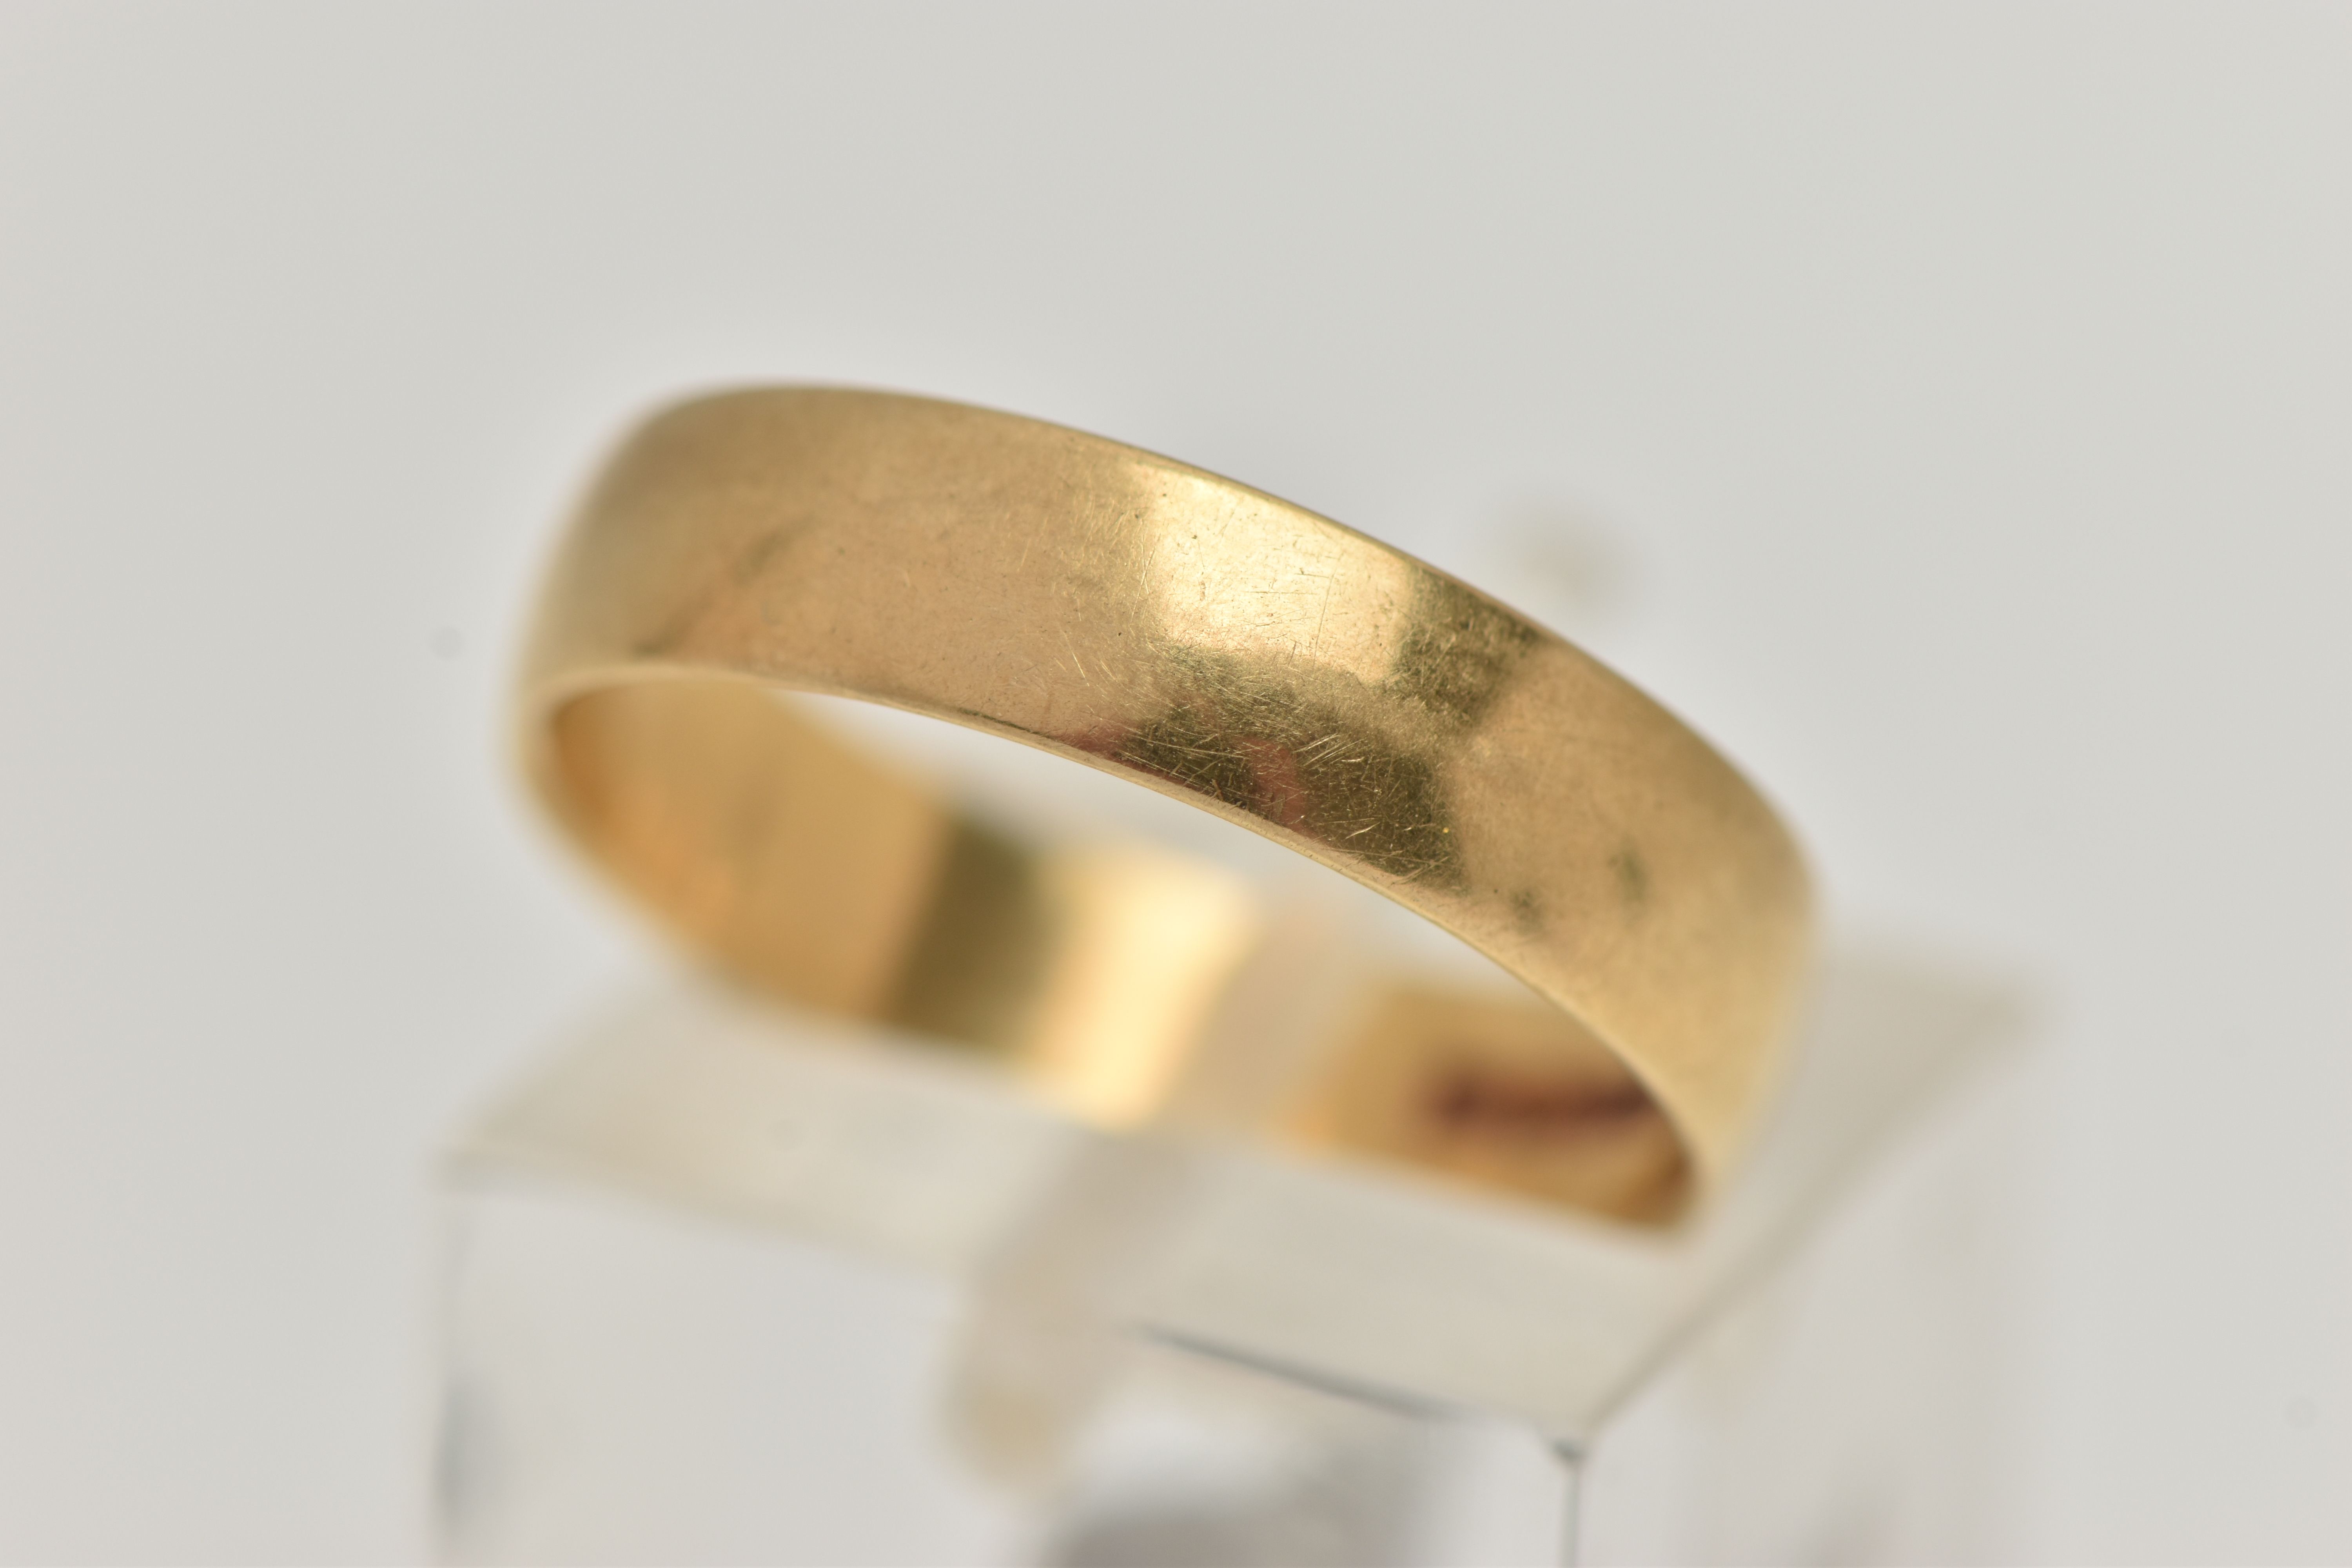 A YELLOW GOLD BAND RING, a plain polished band ring, approximate width 4.5mm, hallmarked 18ct